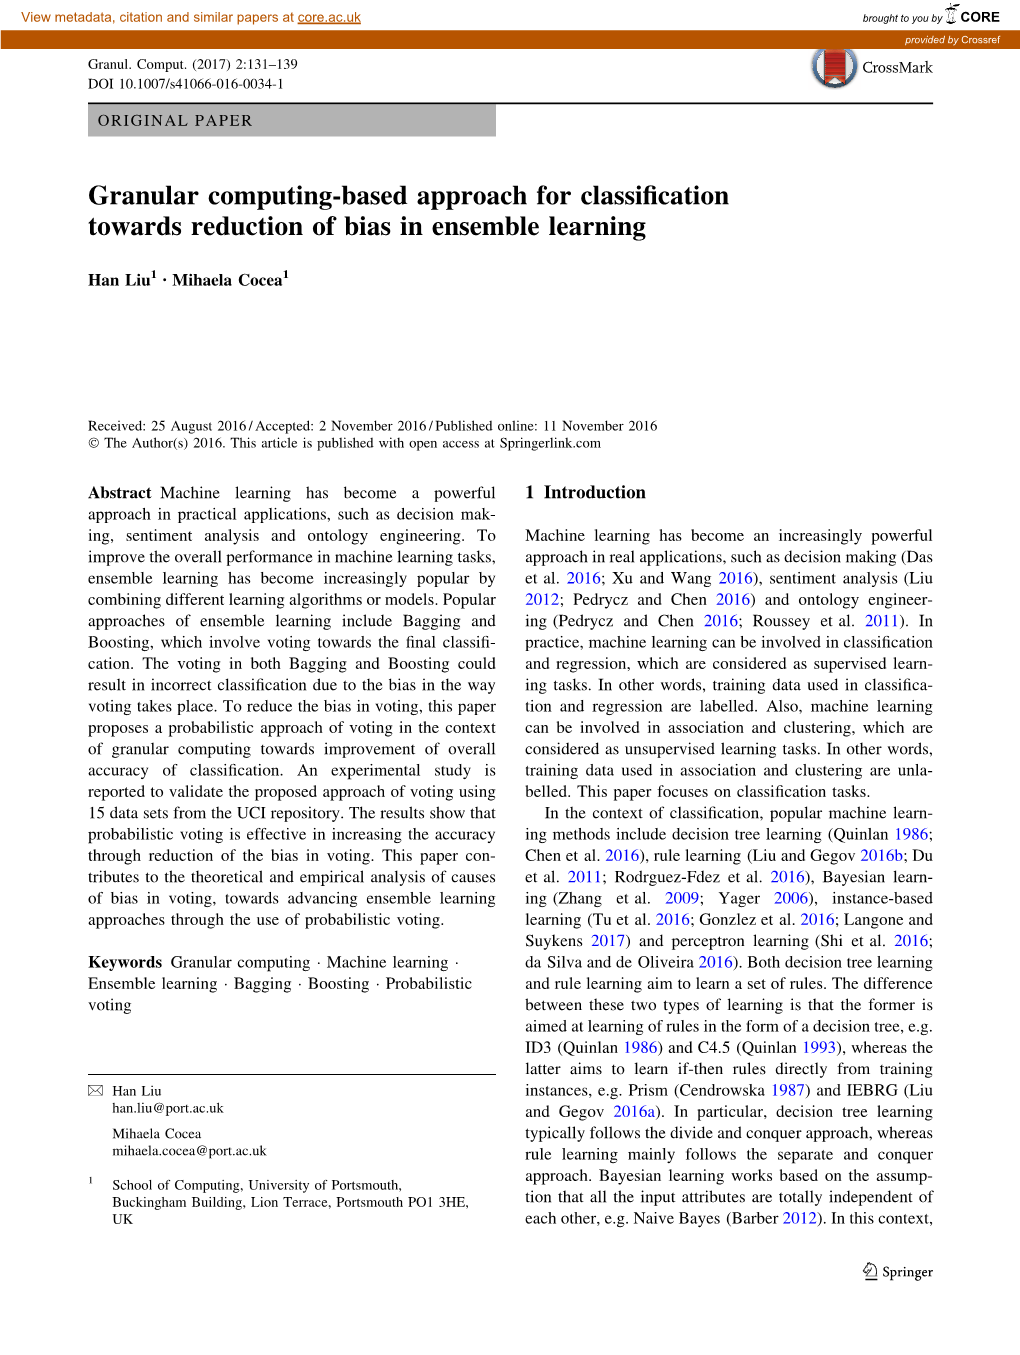 Granular Computing-Based Approach for Classification Towards Reduction